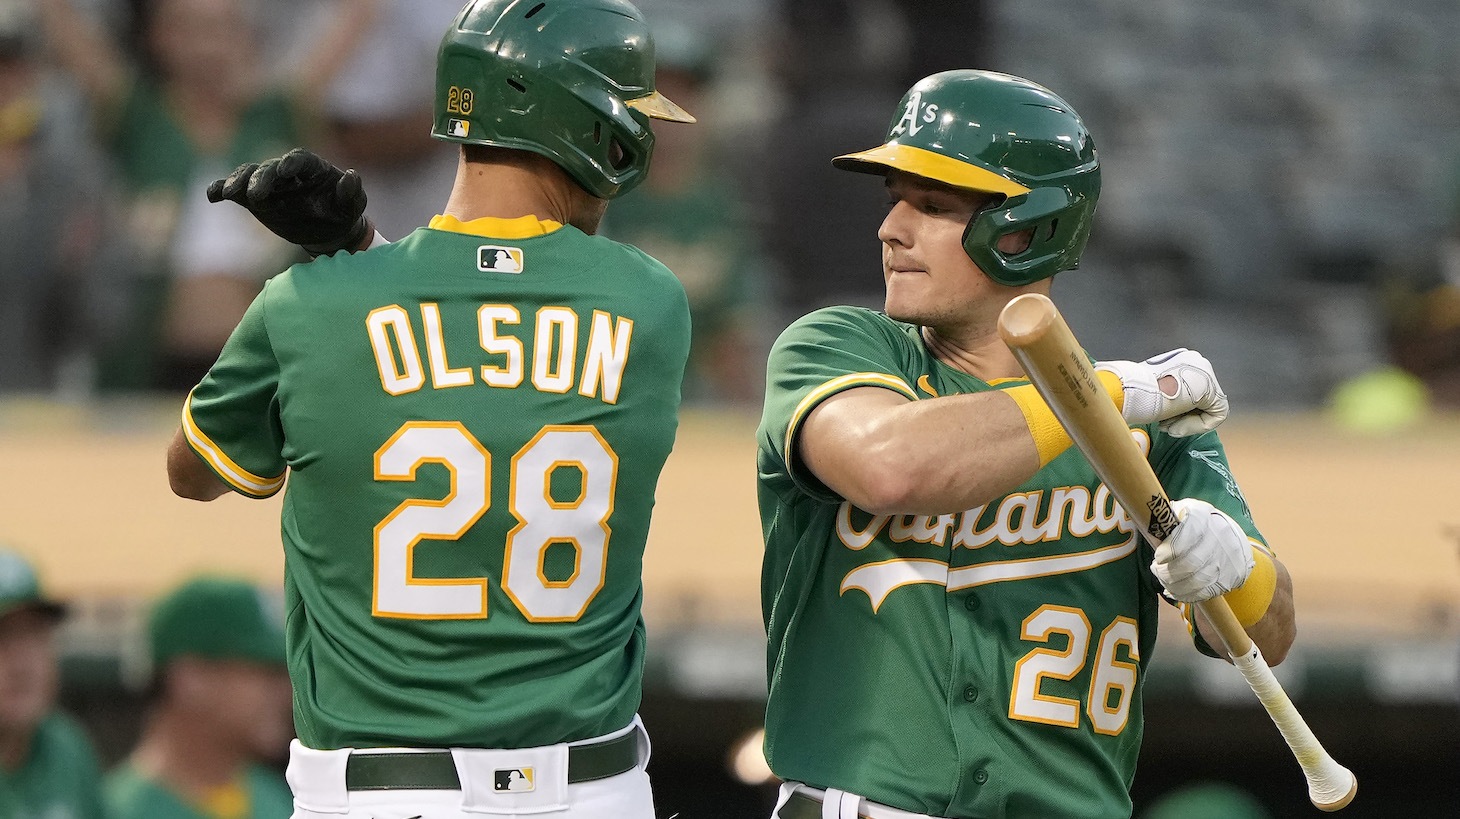 OAKLAND, CALIFORNIA - SEPTEMBER 21: Matt Olson #28 and Matt Chapman #26 of the Oakland Athletics celebrate after Olson hit a solo home run against the Seattle Mariners in the bottom of the first inning at RingCentral Coliseum on September 21, 2021 in Oakland, California. (Photo by Thearon W. Henderson/Getty Images)